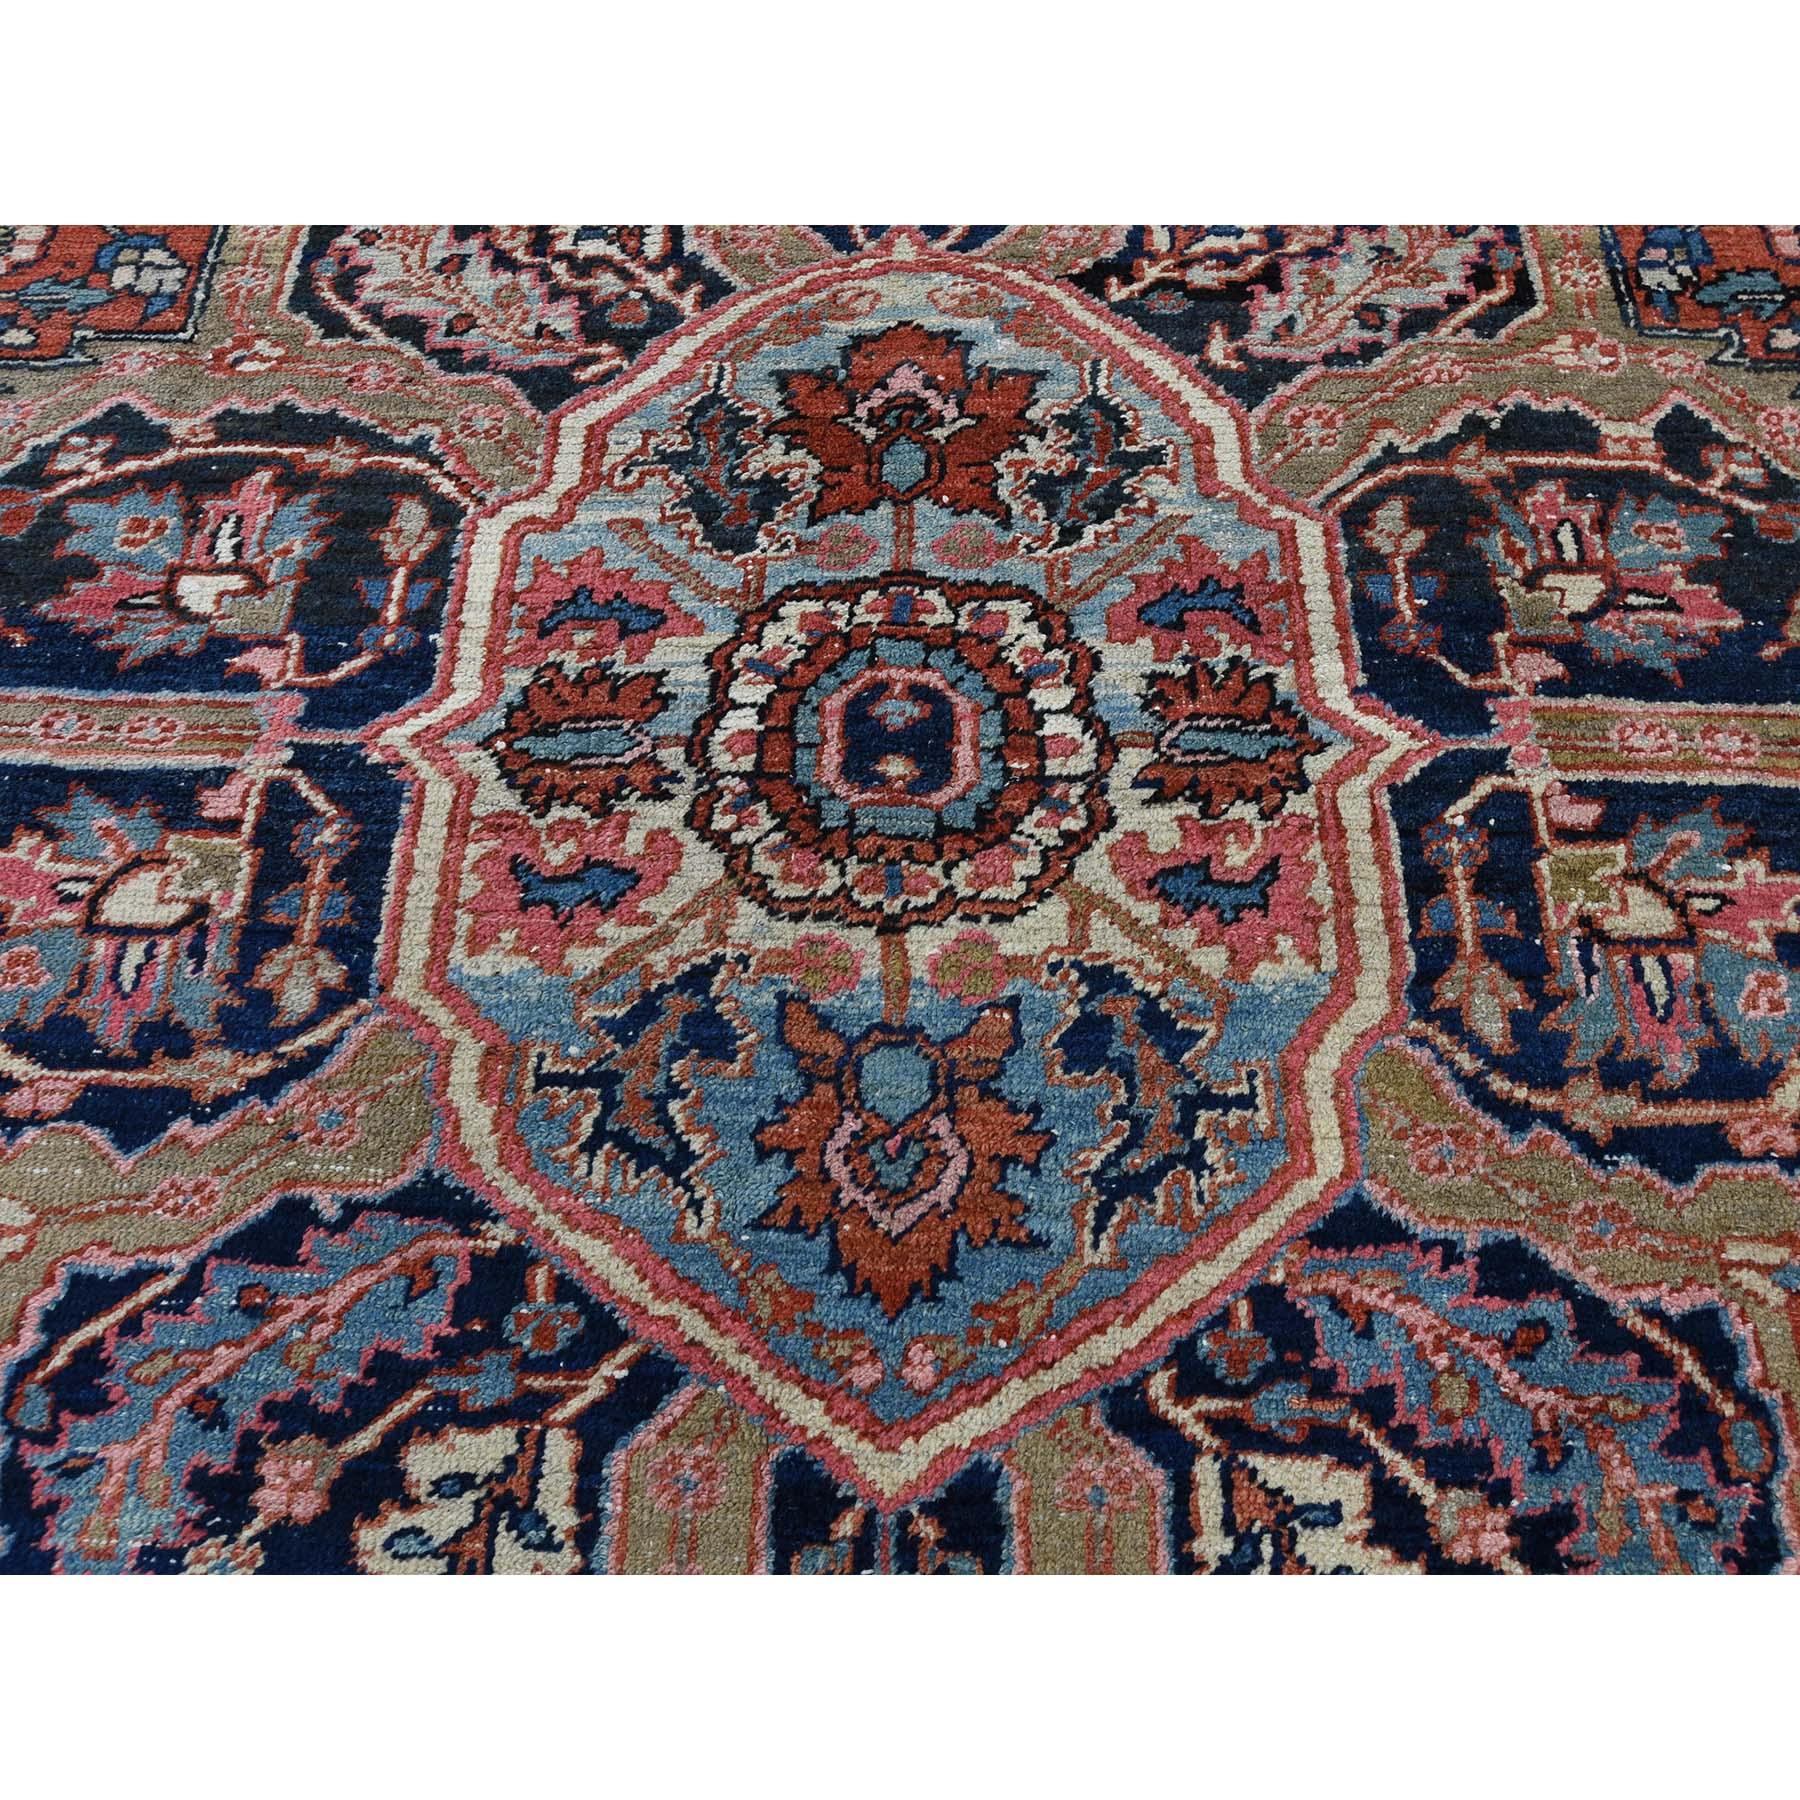 Antique Persian Heriz Good Condition Flower Design Hand-Knotted Oriental Rug 3